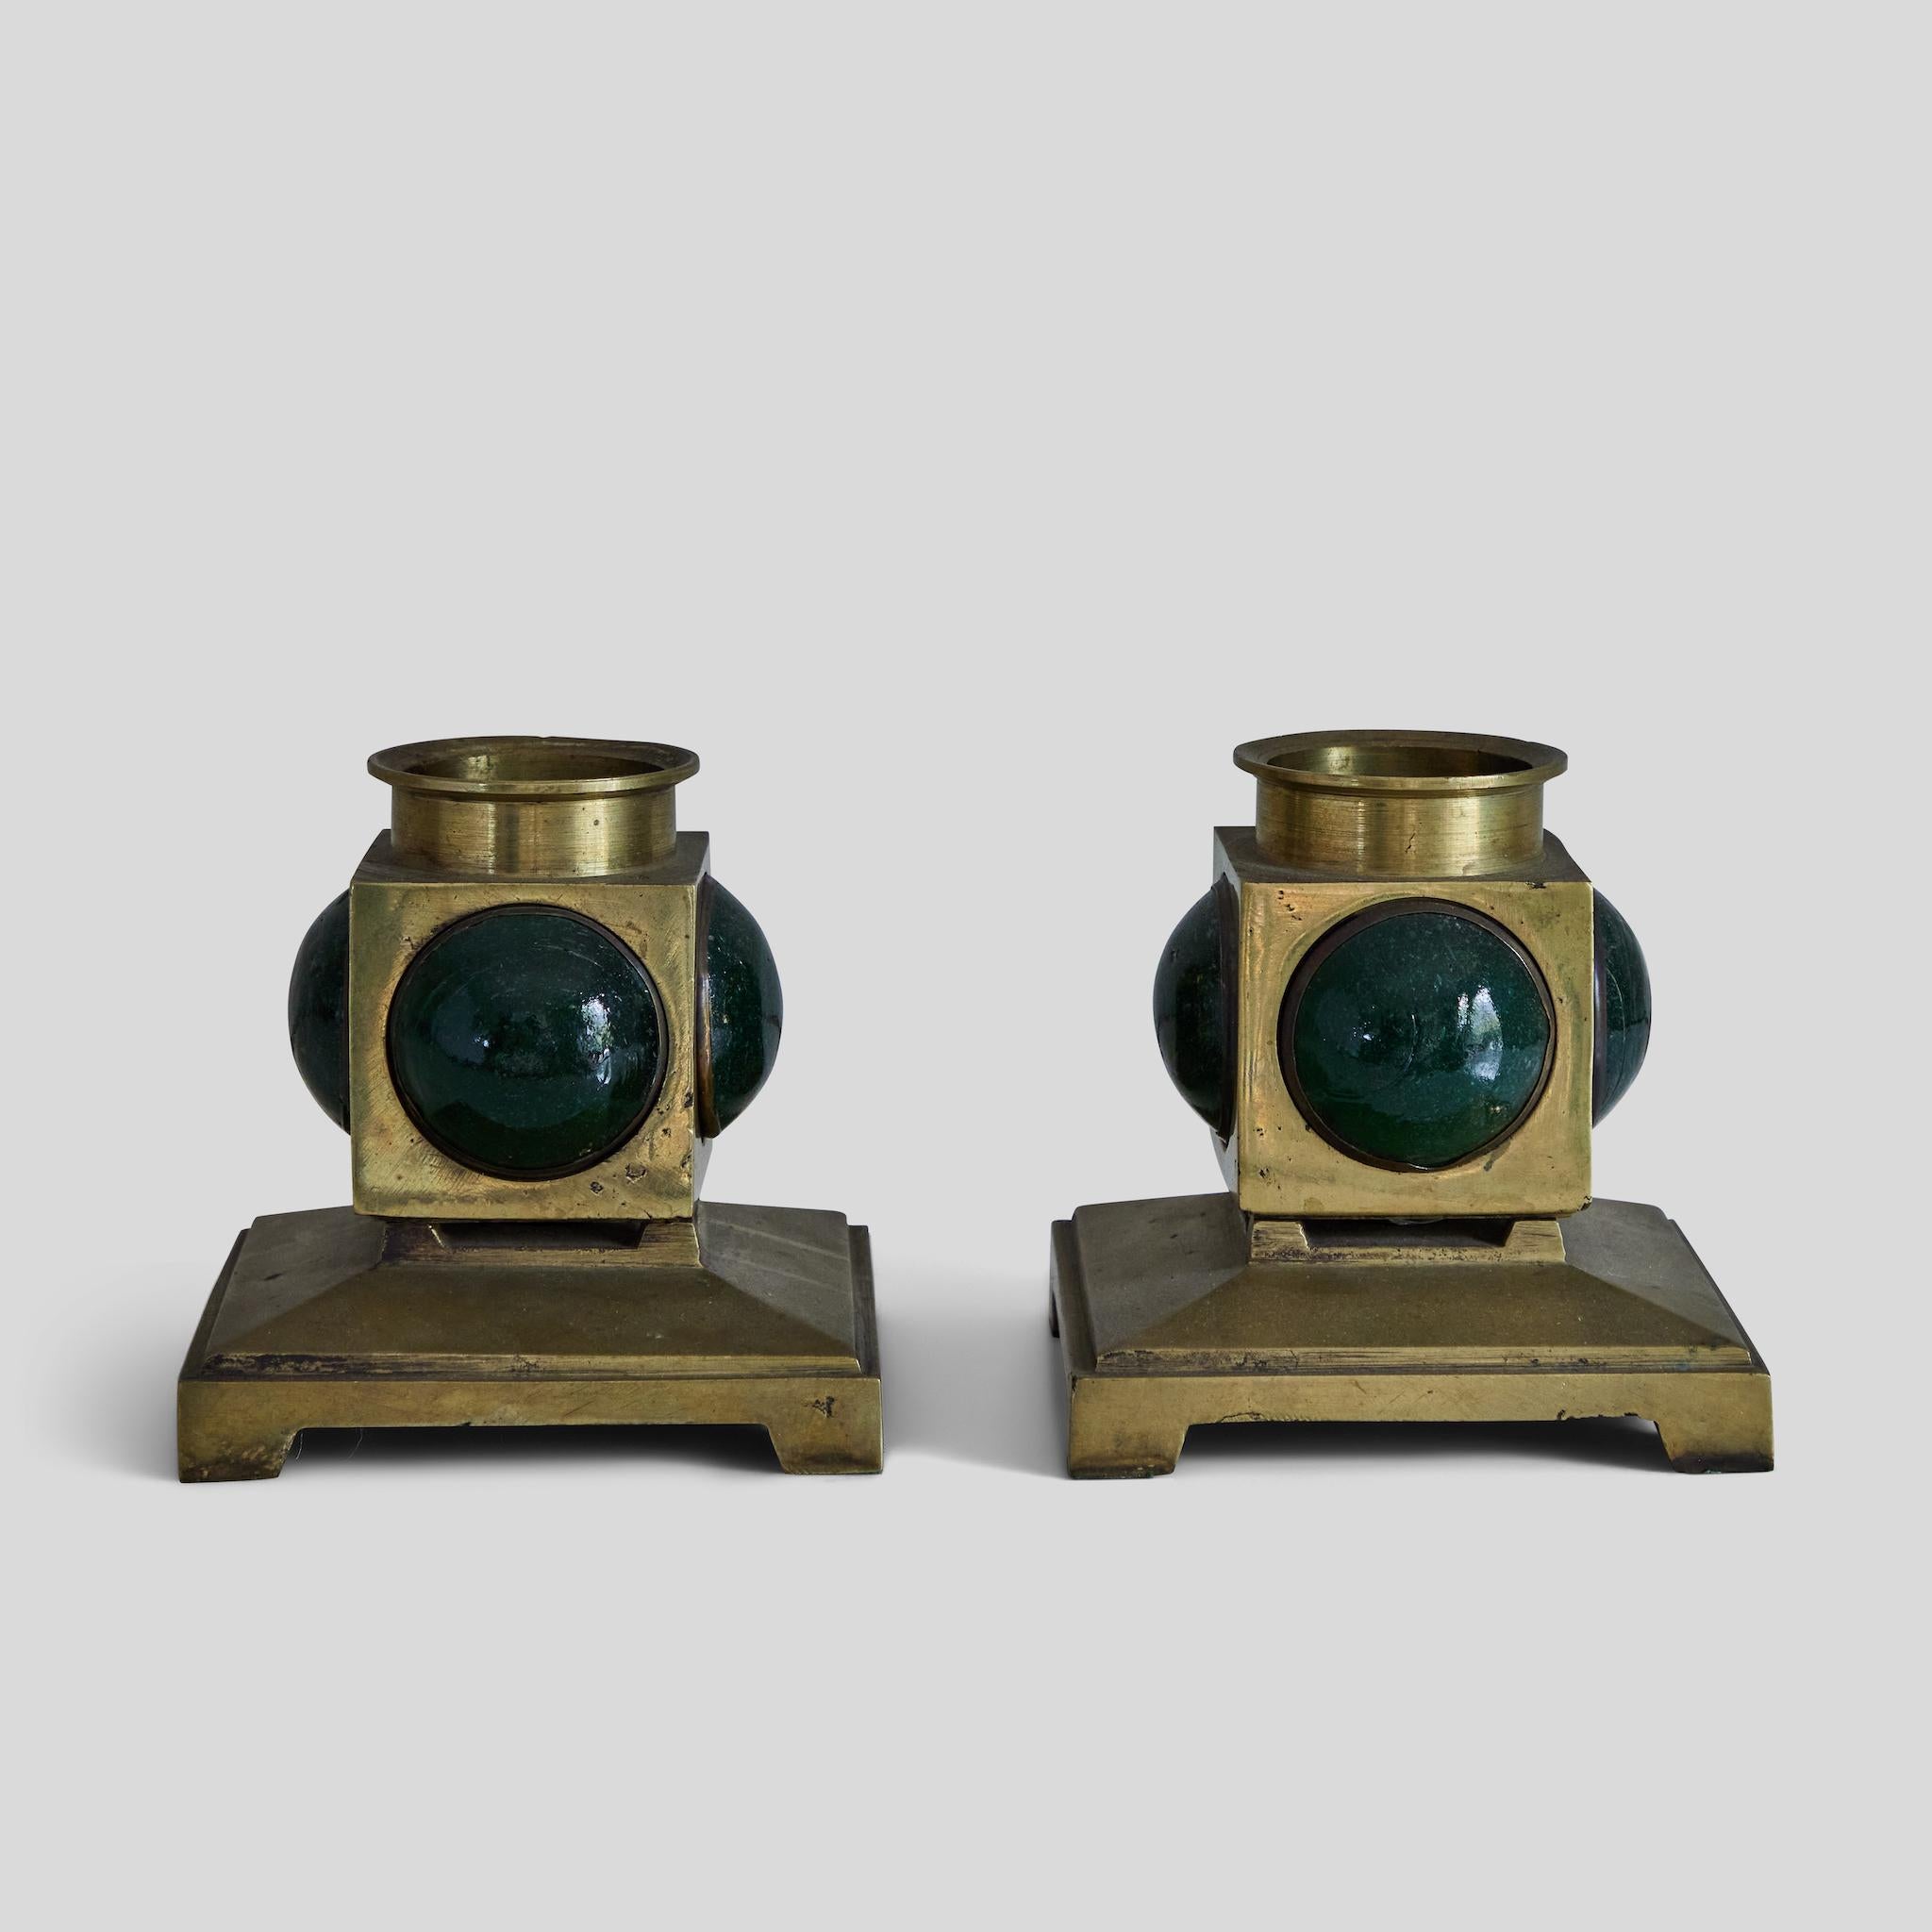 This is a pair of brass candlesticks dating from 1950s France with curved colored glass elements on each side. 